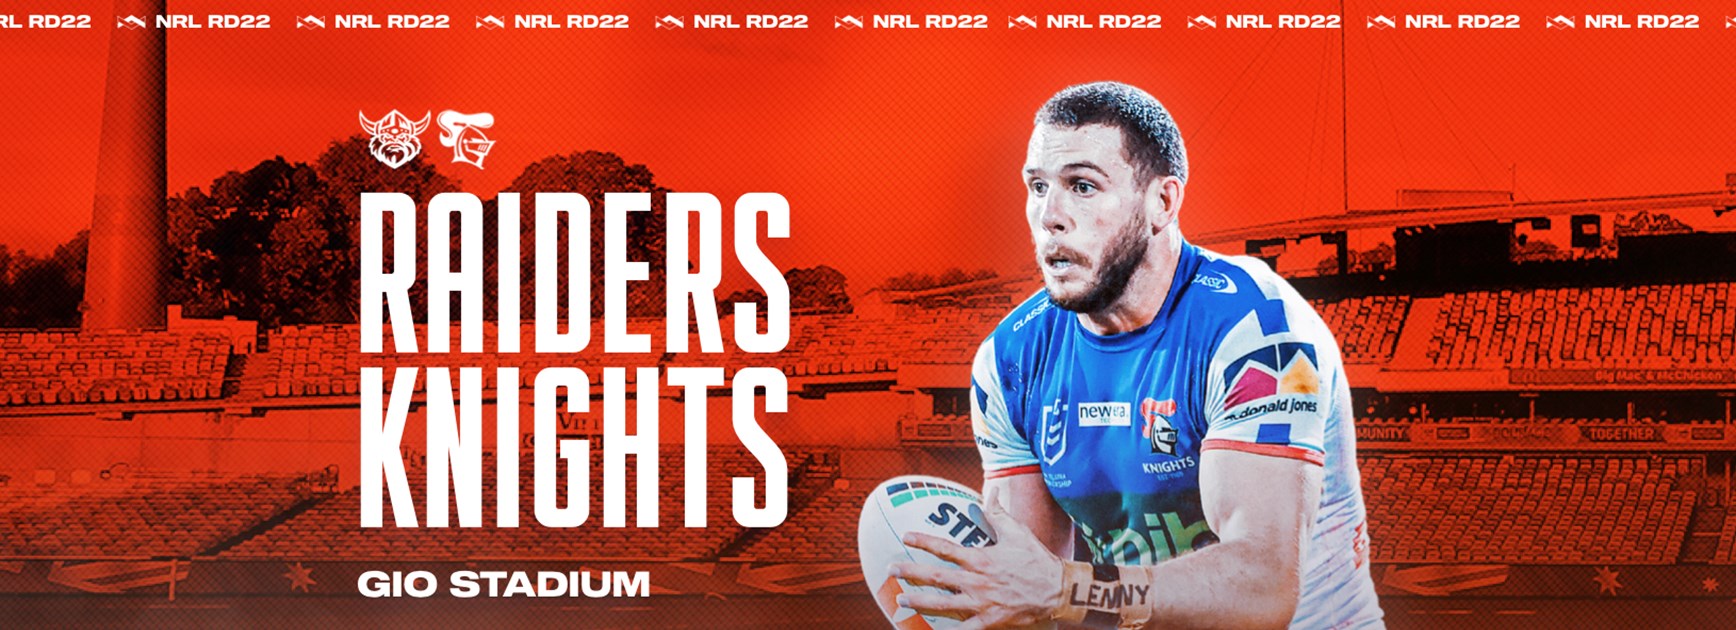 Defend the Kingdom: NRL Round 22 preview